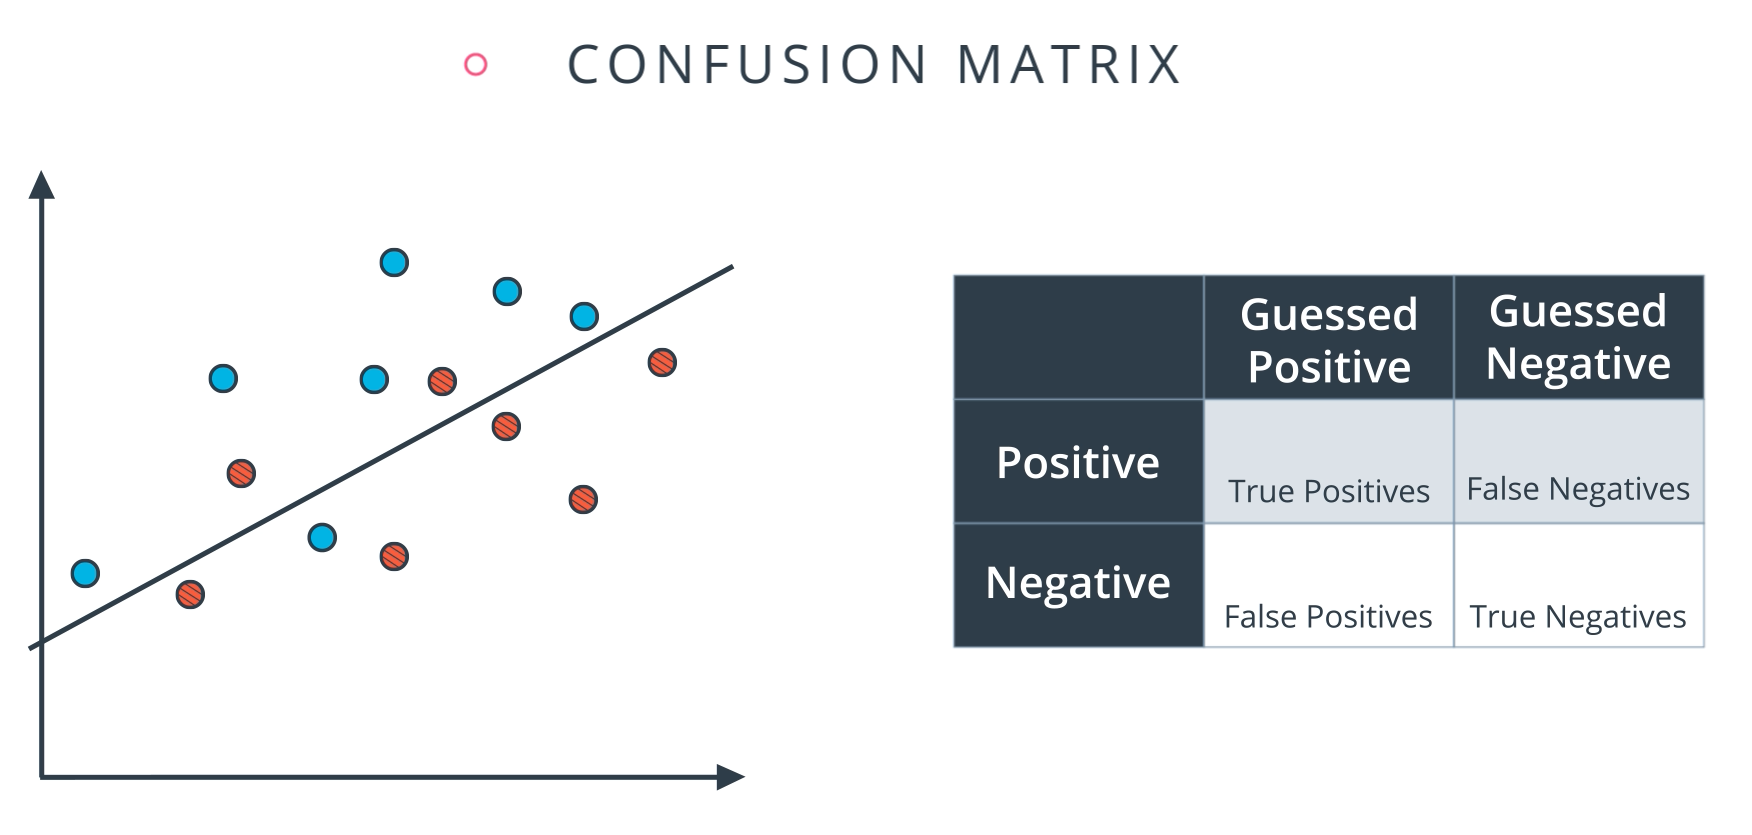 In this image, the blue points are labelled positive, and the red points are labelled negative.
Furthermore, the points on top of the line are predicted (guessed) to be positive, and the points below the line are predicted to be negative.